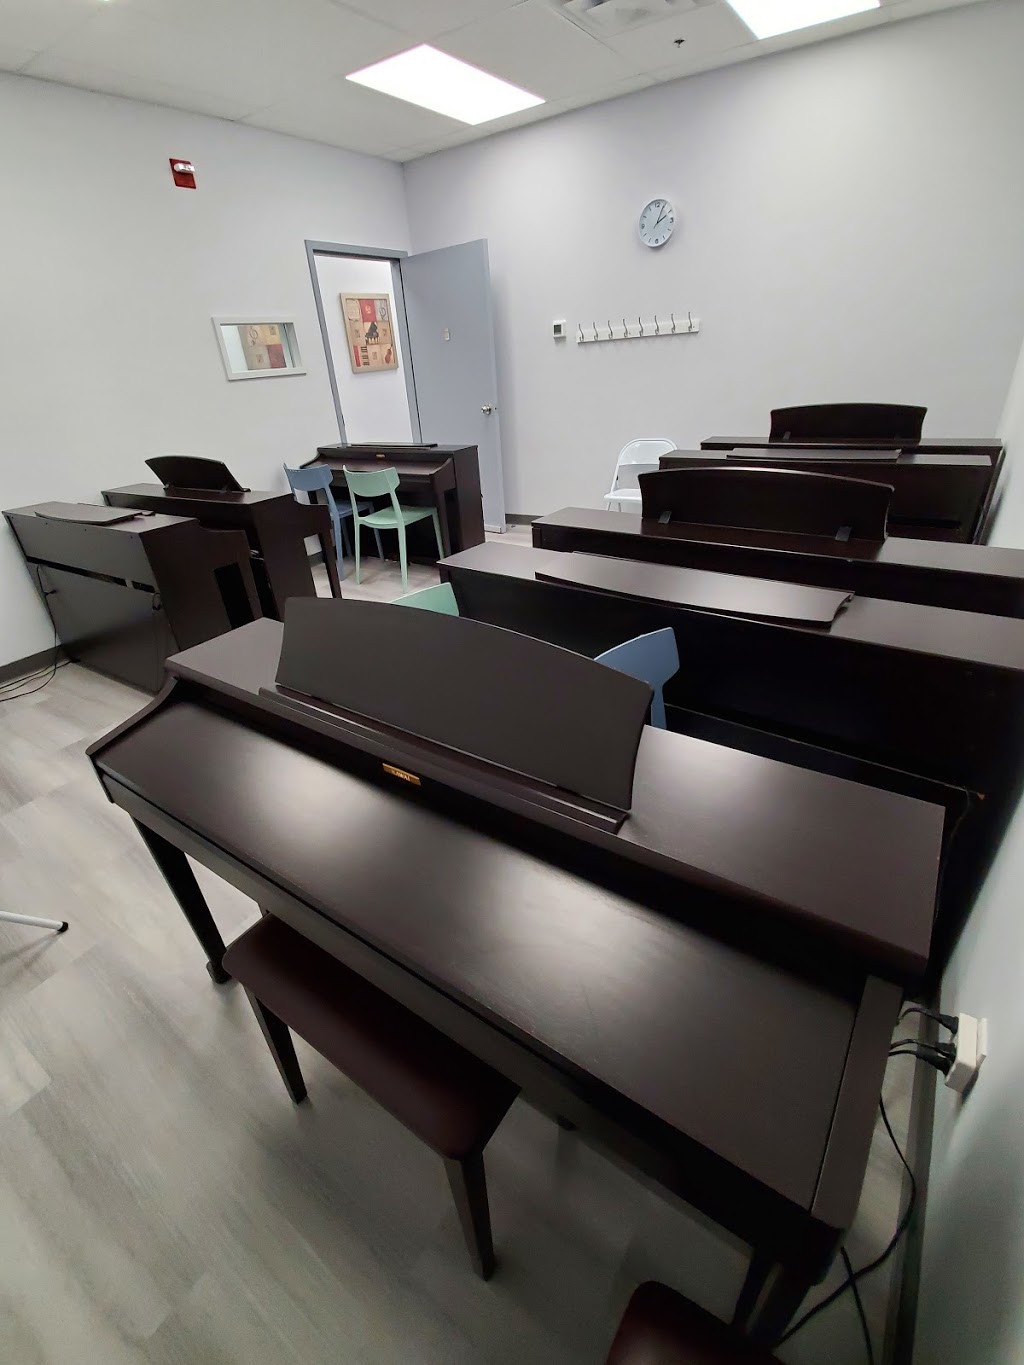 Accento School of Music | 1457 McCowan Rd Suite 205 A, Scarborough, ON M1S 5K7, Canada | Phone: (416) 321-5176